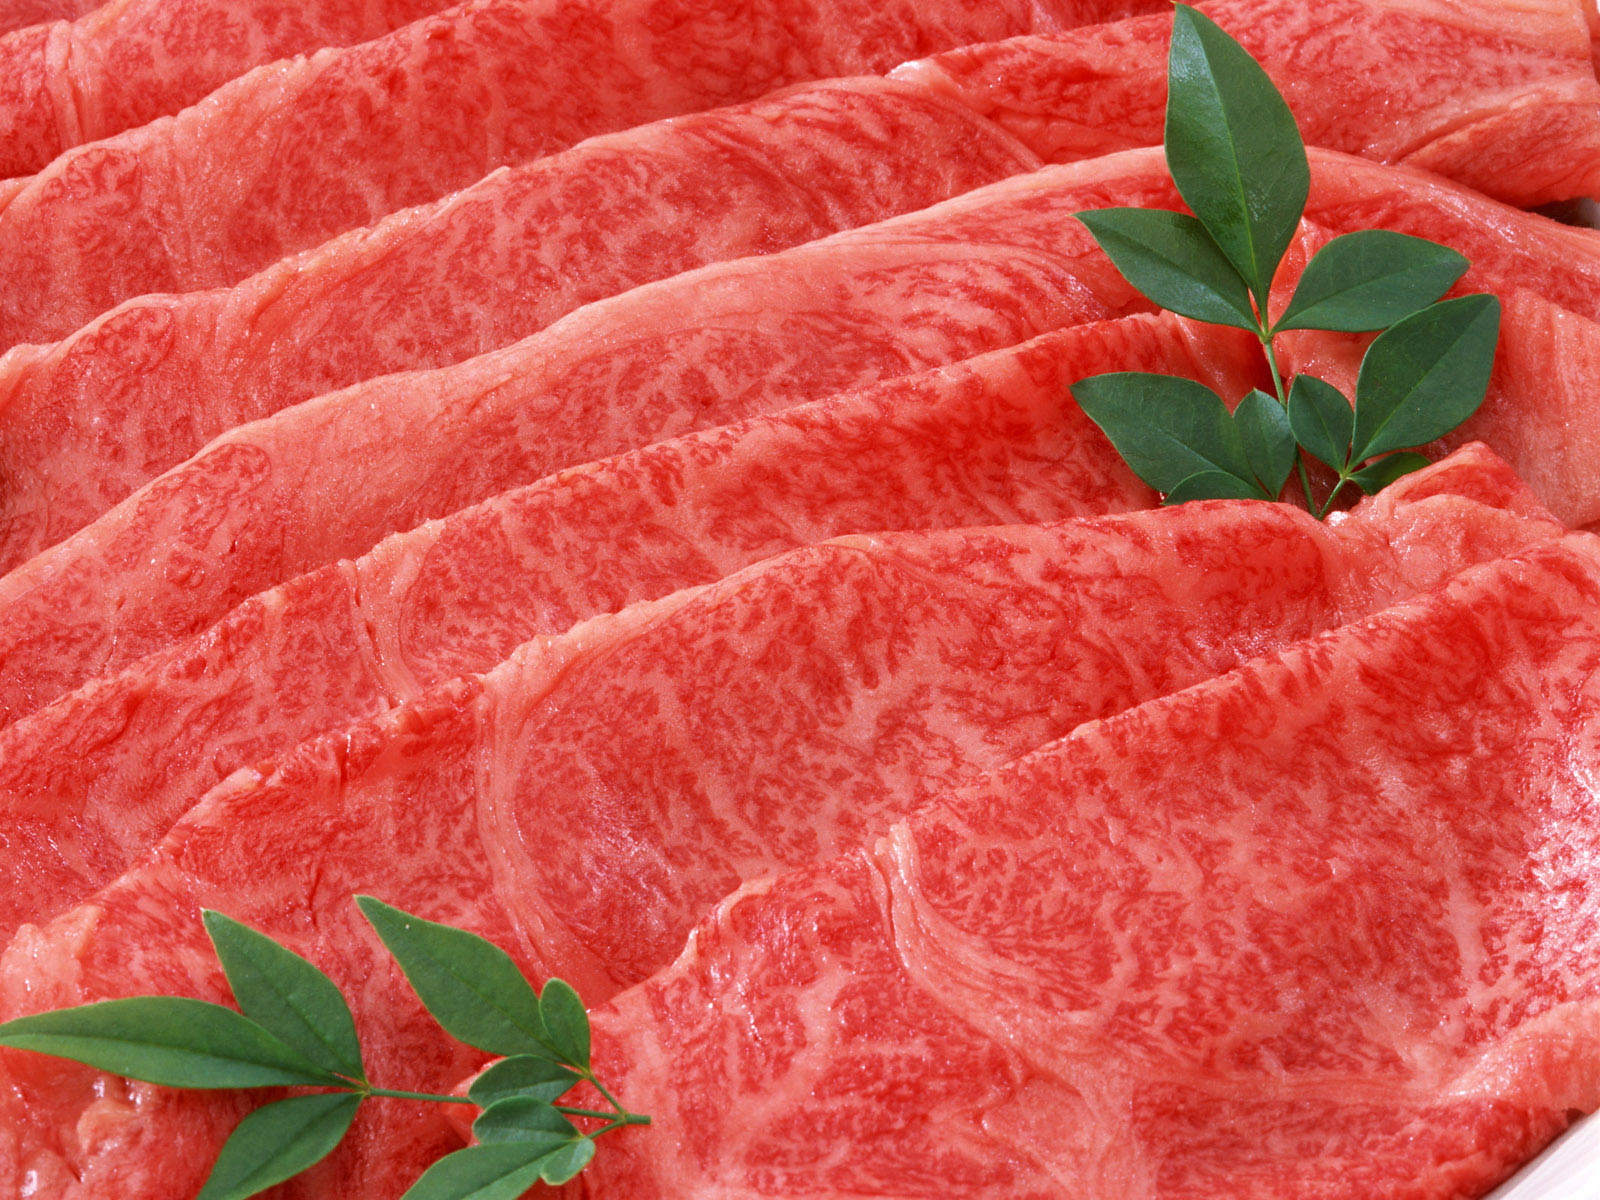 Raw Meat Wallpaper And Image